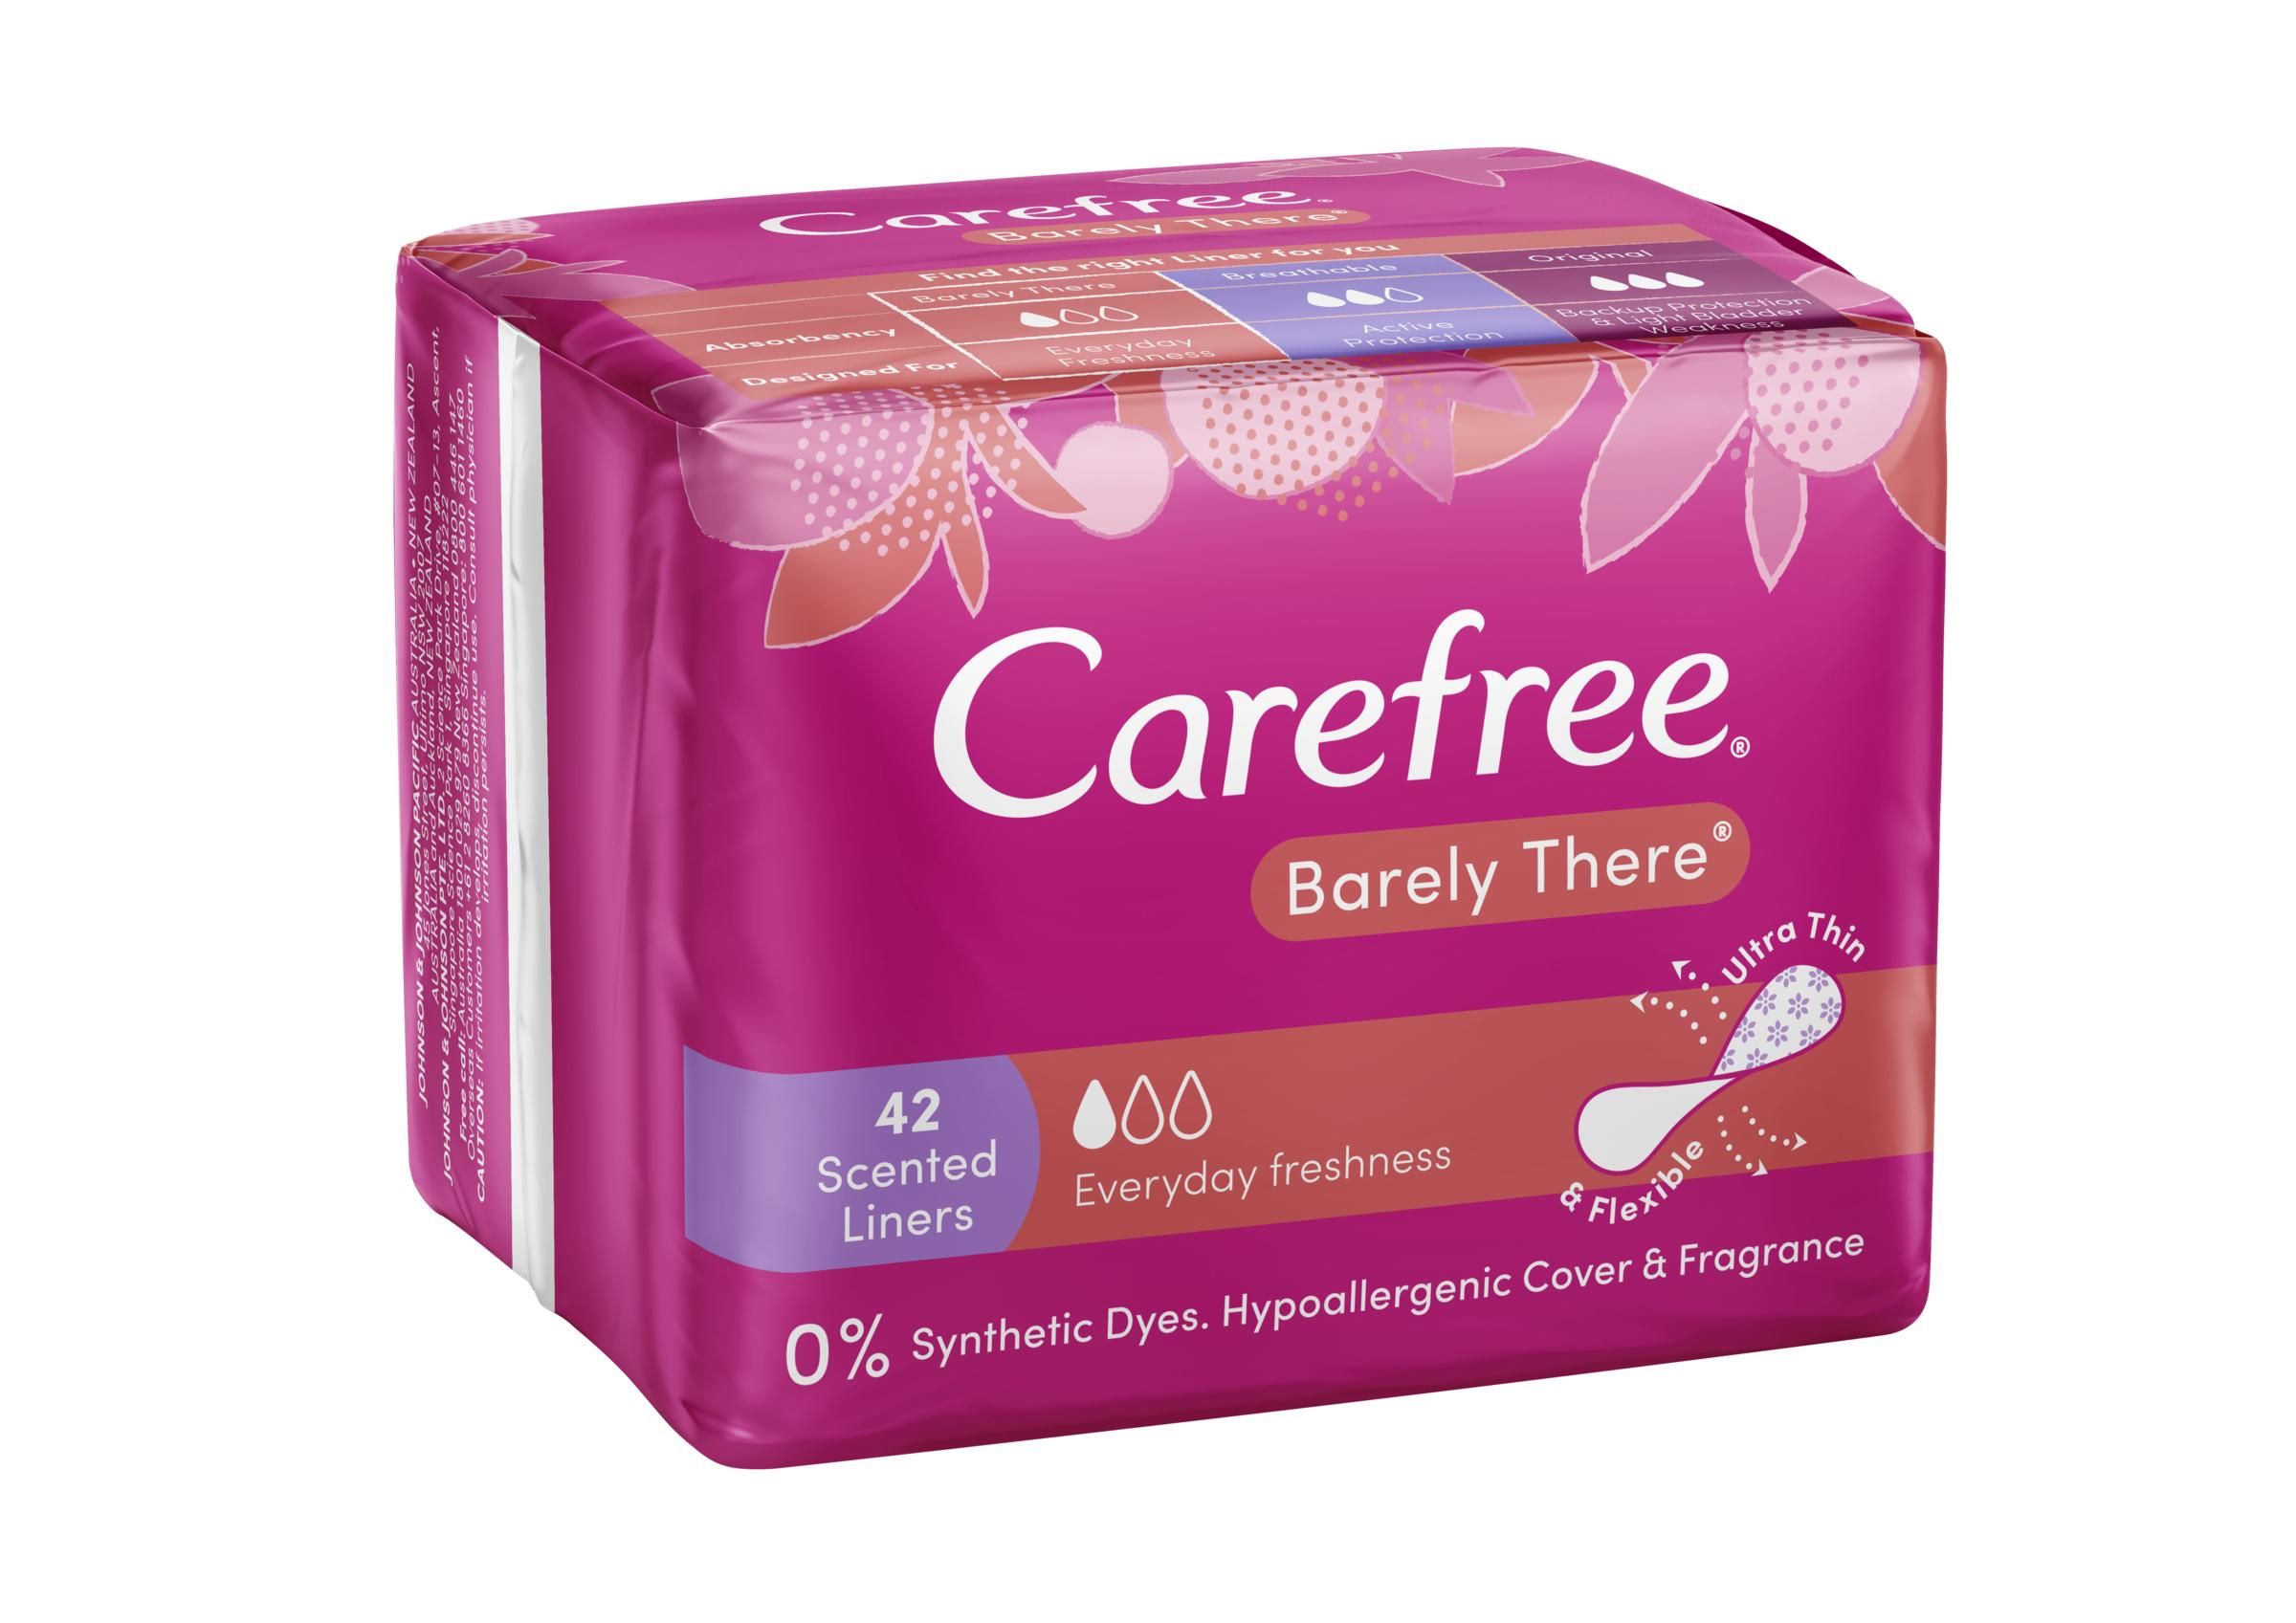 Carefree Normal with Cotton Extract Panty Liners, Pack of 20, White : :  Health & Personal Care